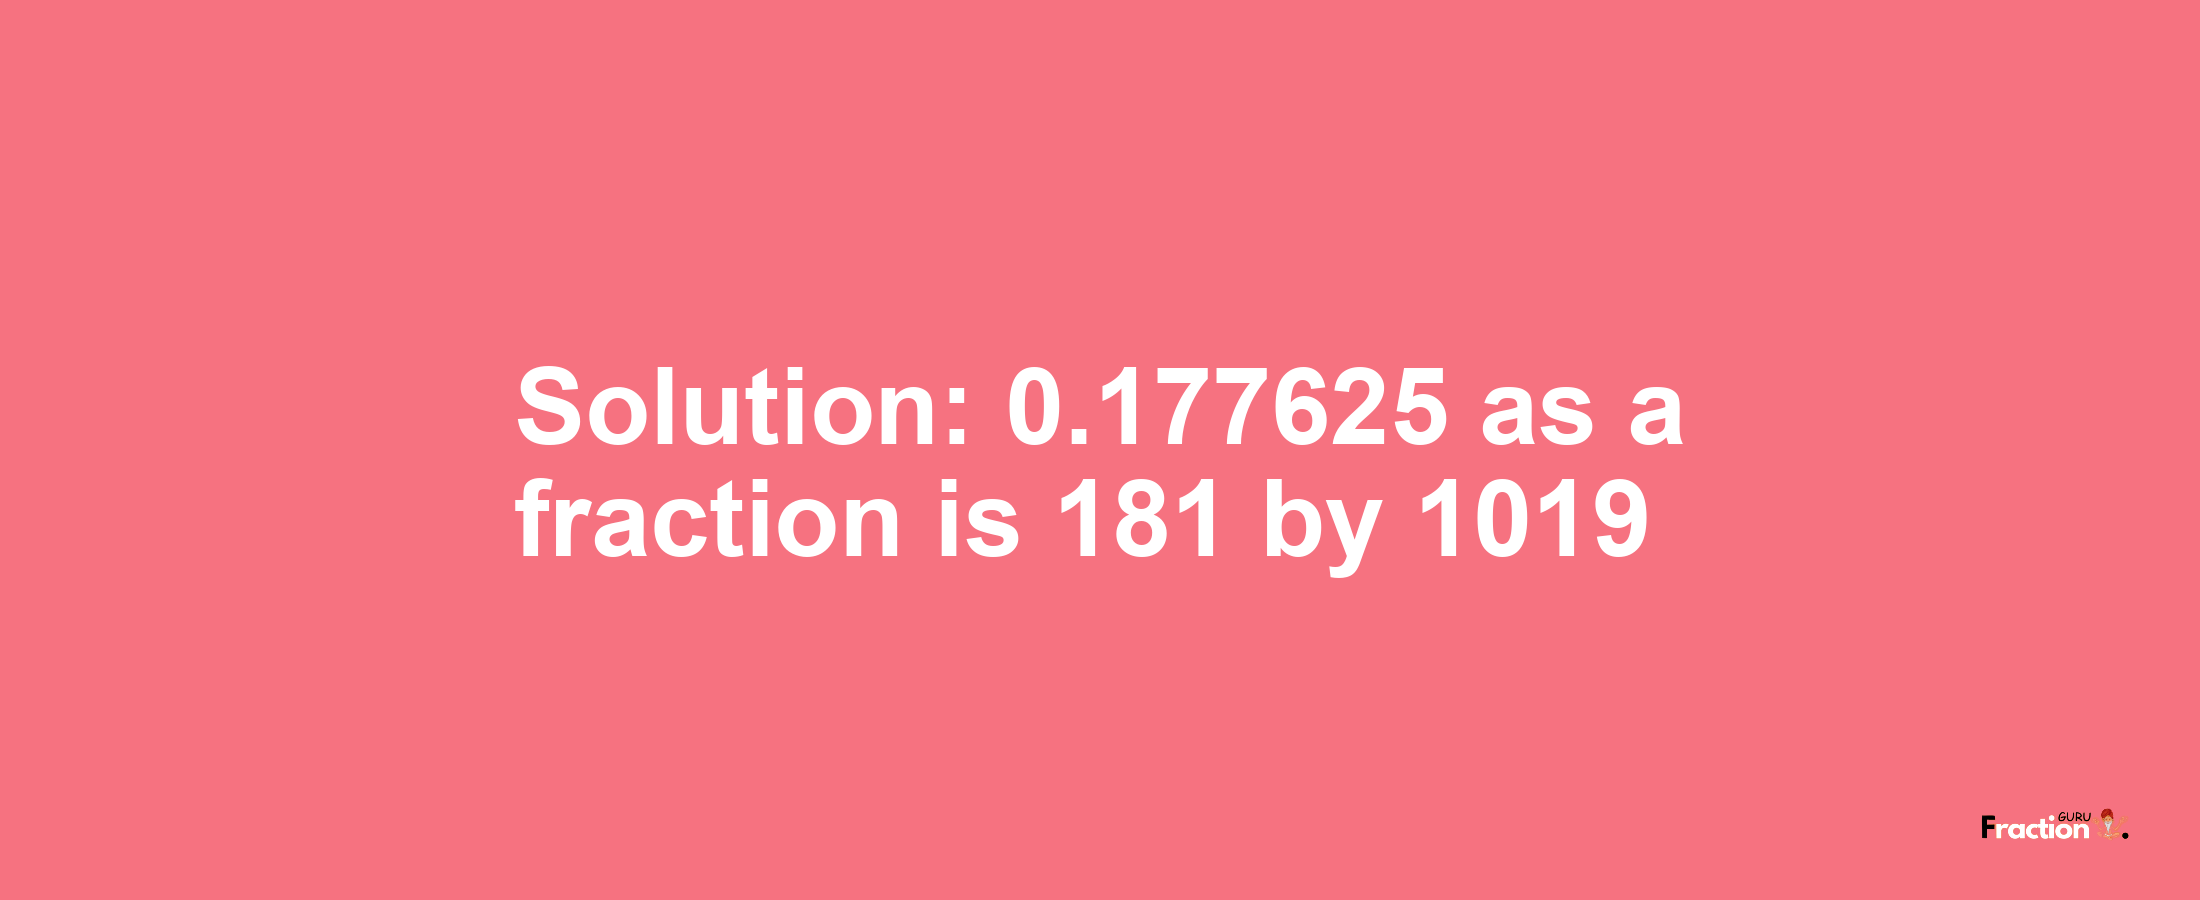 Solution:0.177625 as a fraction is 181/1019